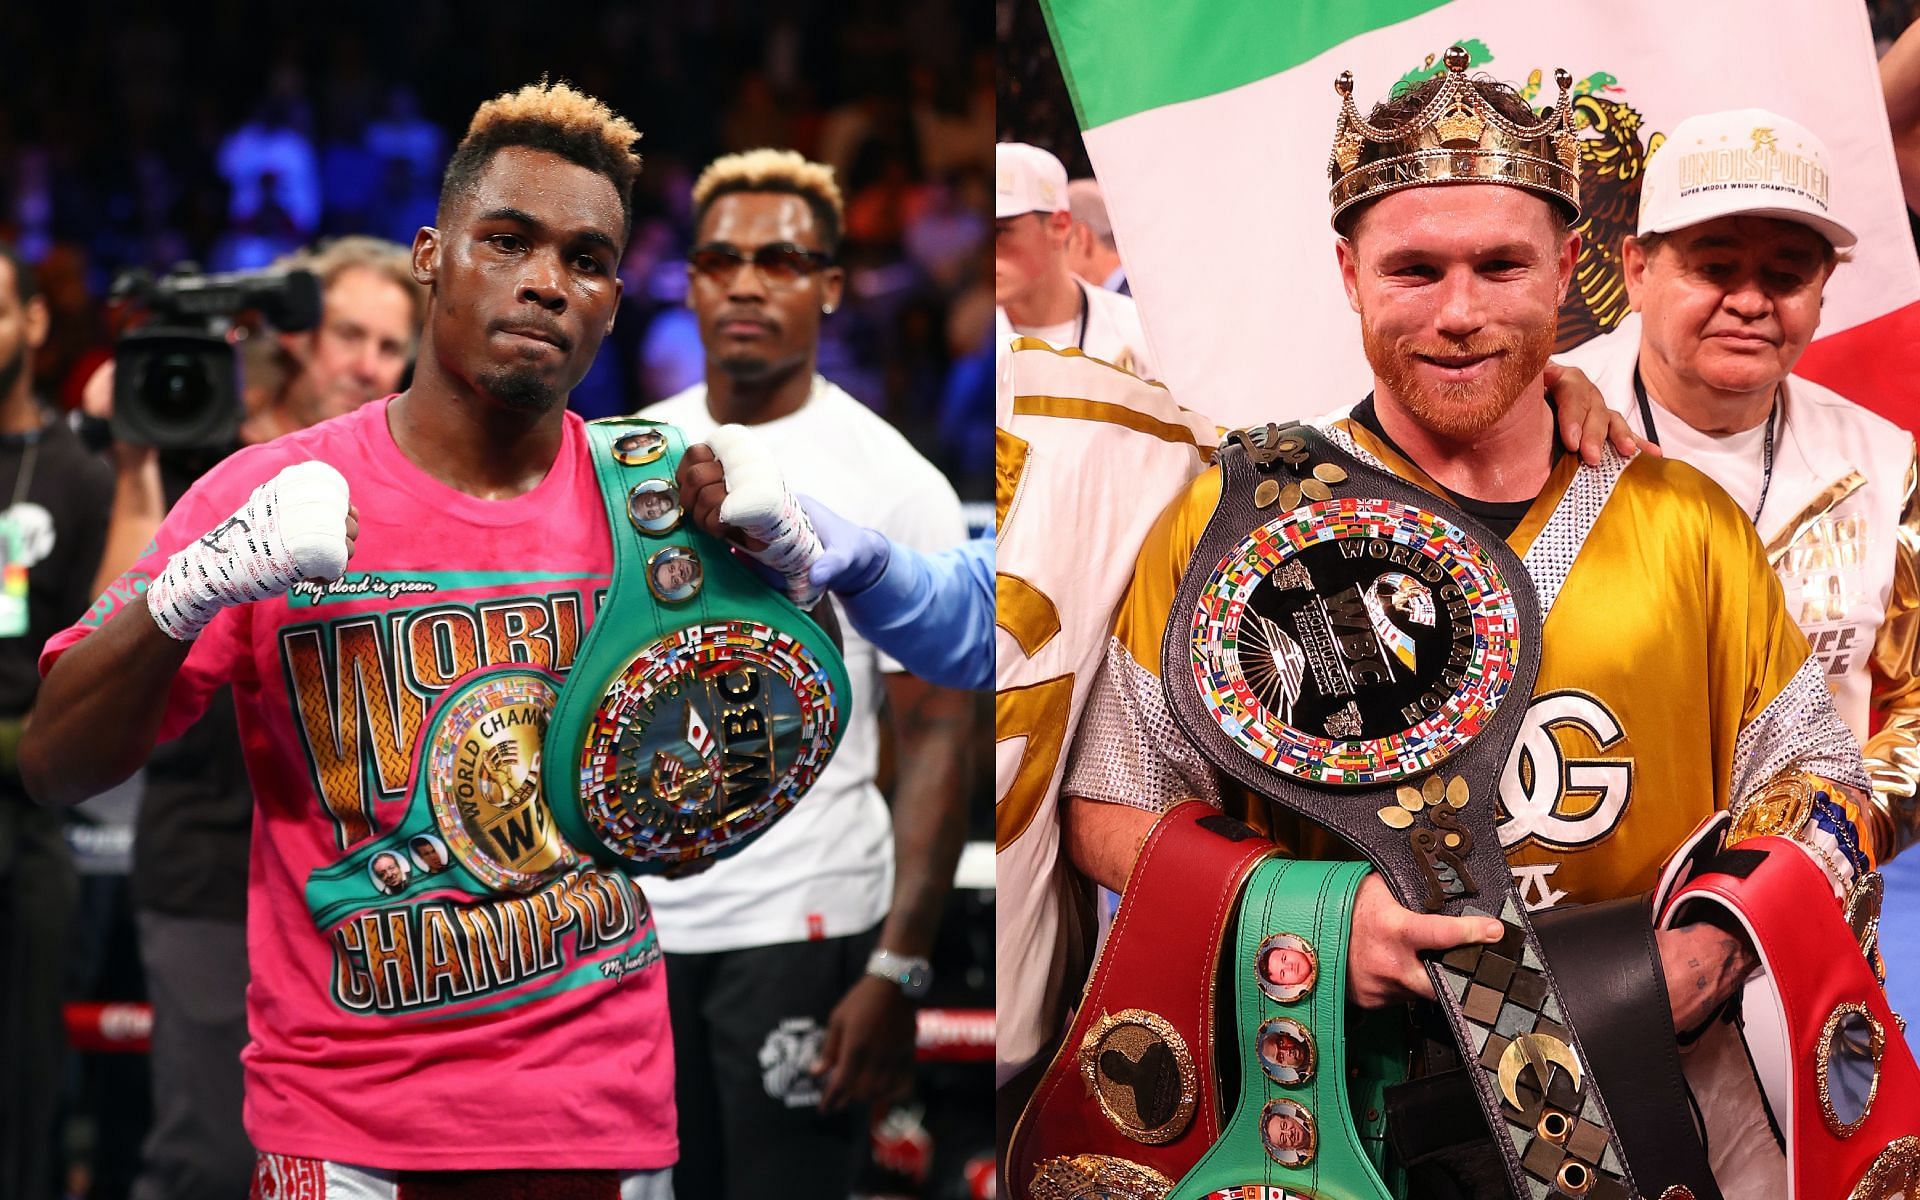 Canelo Alvarez and Jermell Charlo [Image credits: Getty Images]